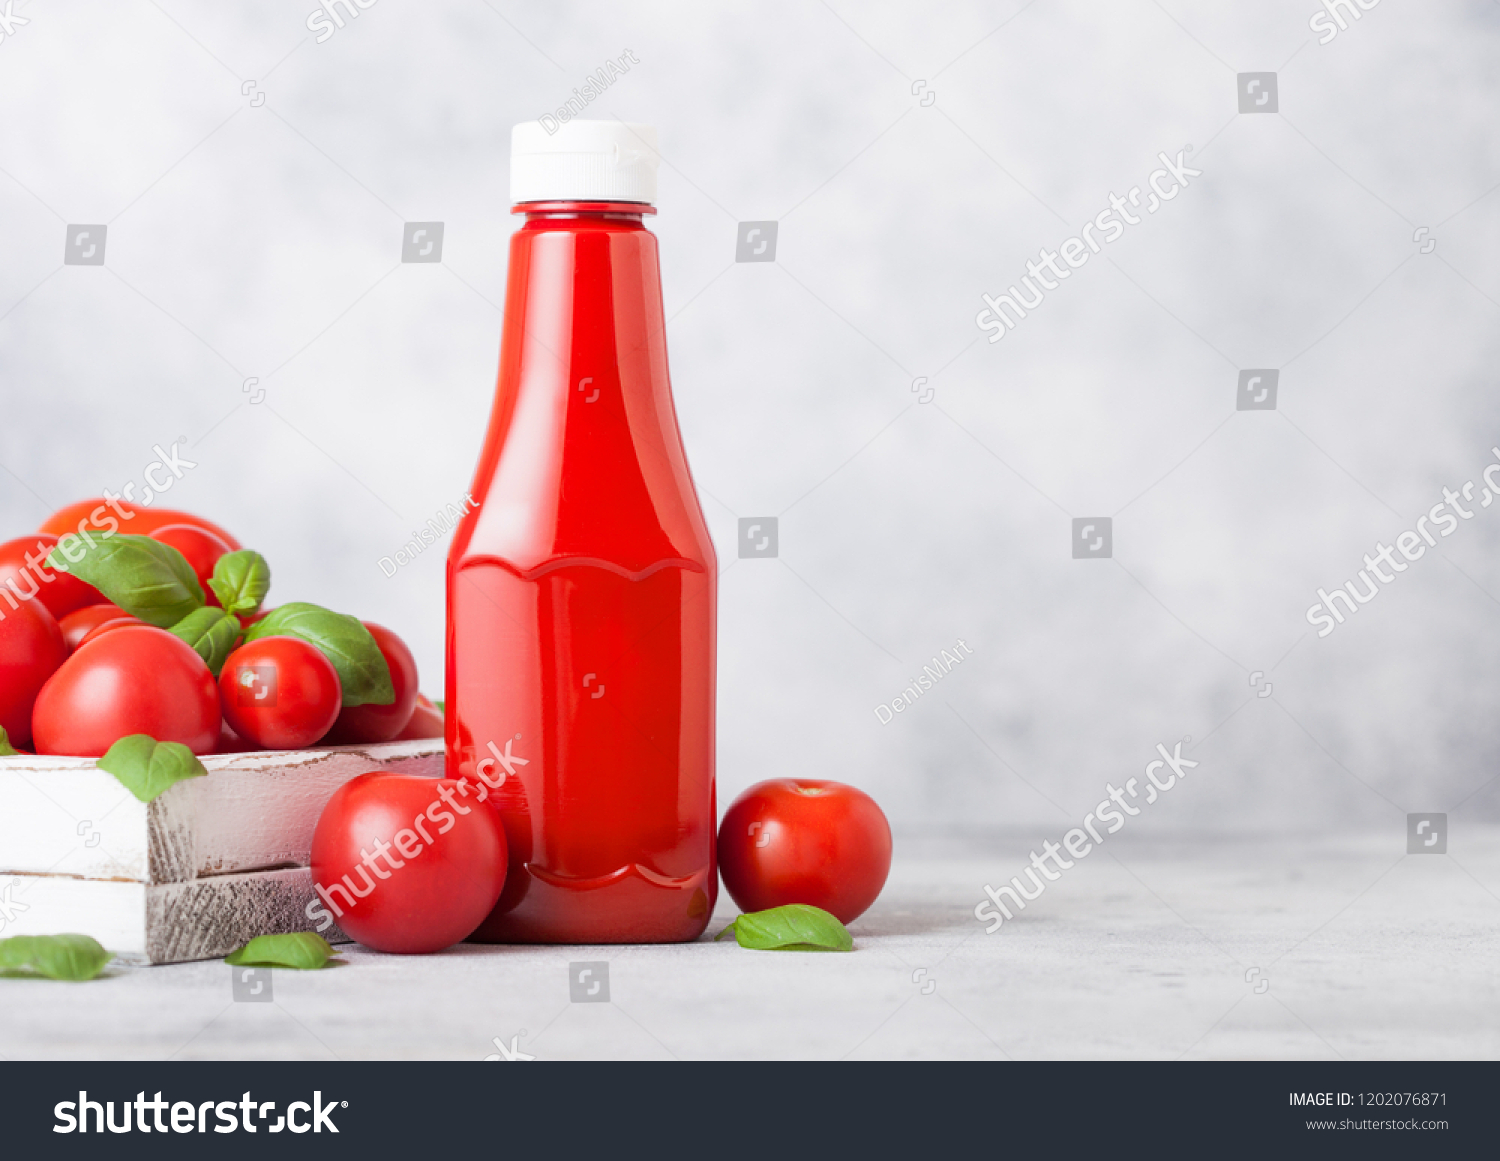 Download Plastic Container Tomato Ketchup Sauce Raw Food And Drink Stock Image 1202076871 Yellowimages Mockups